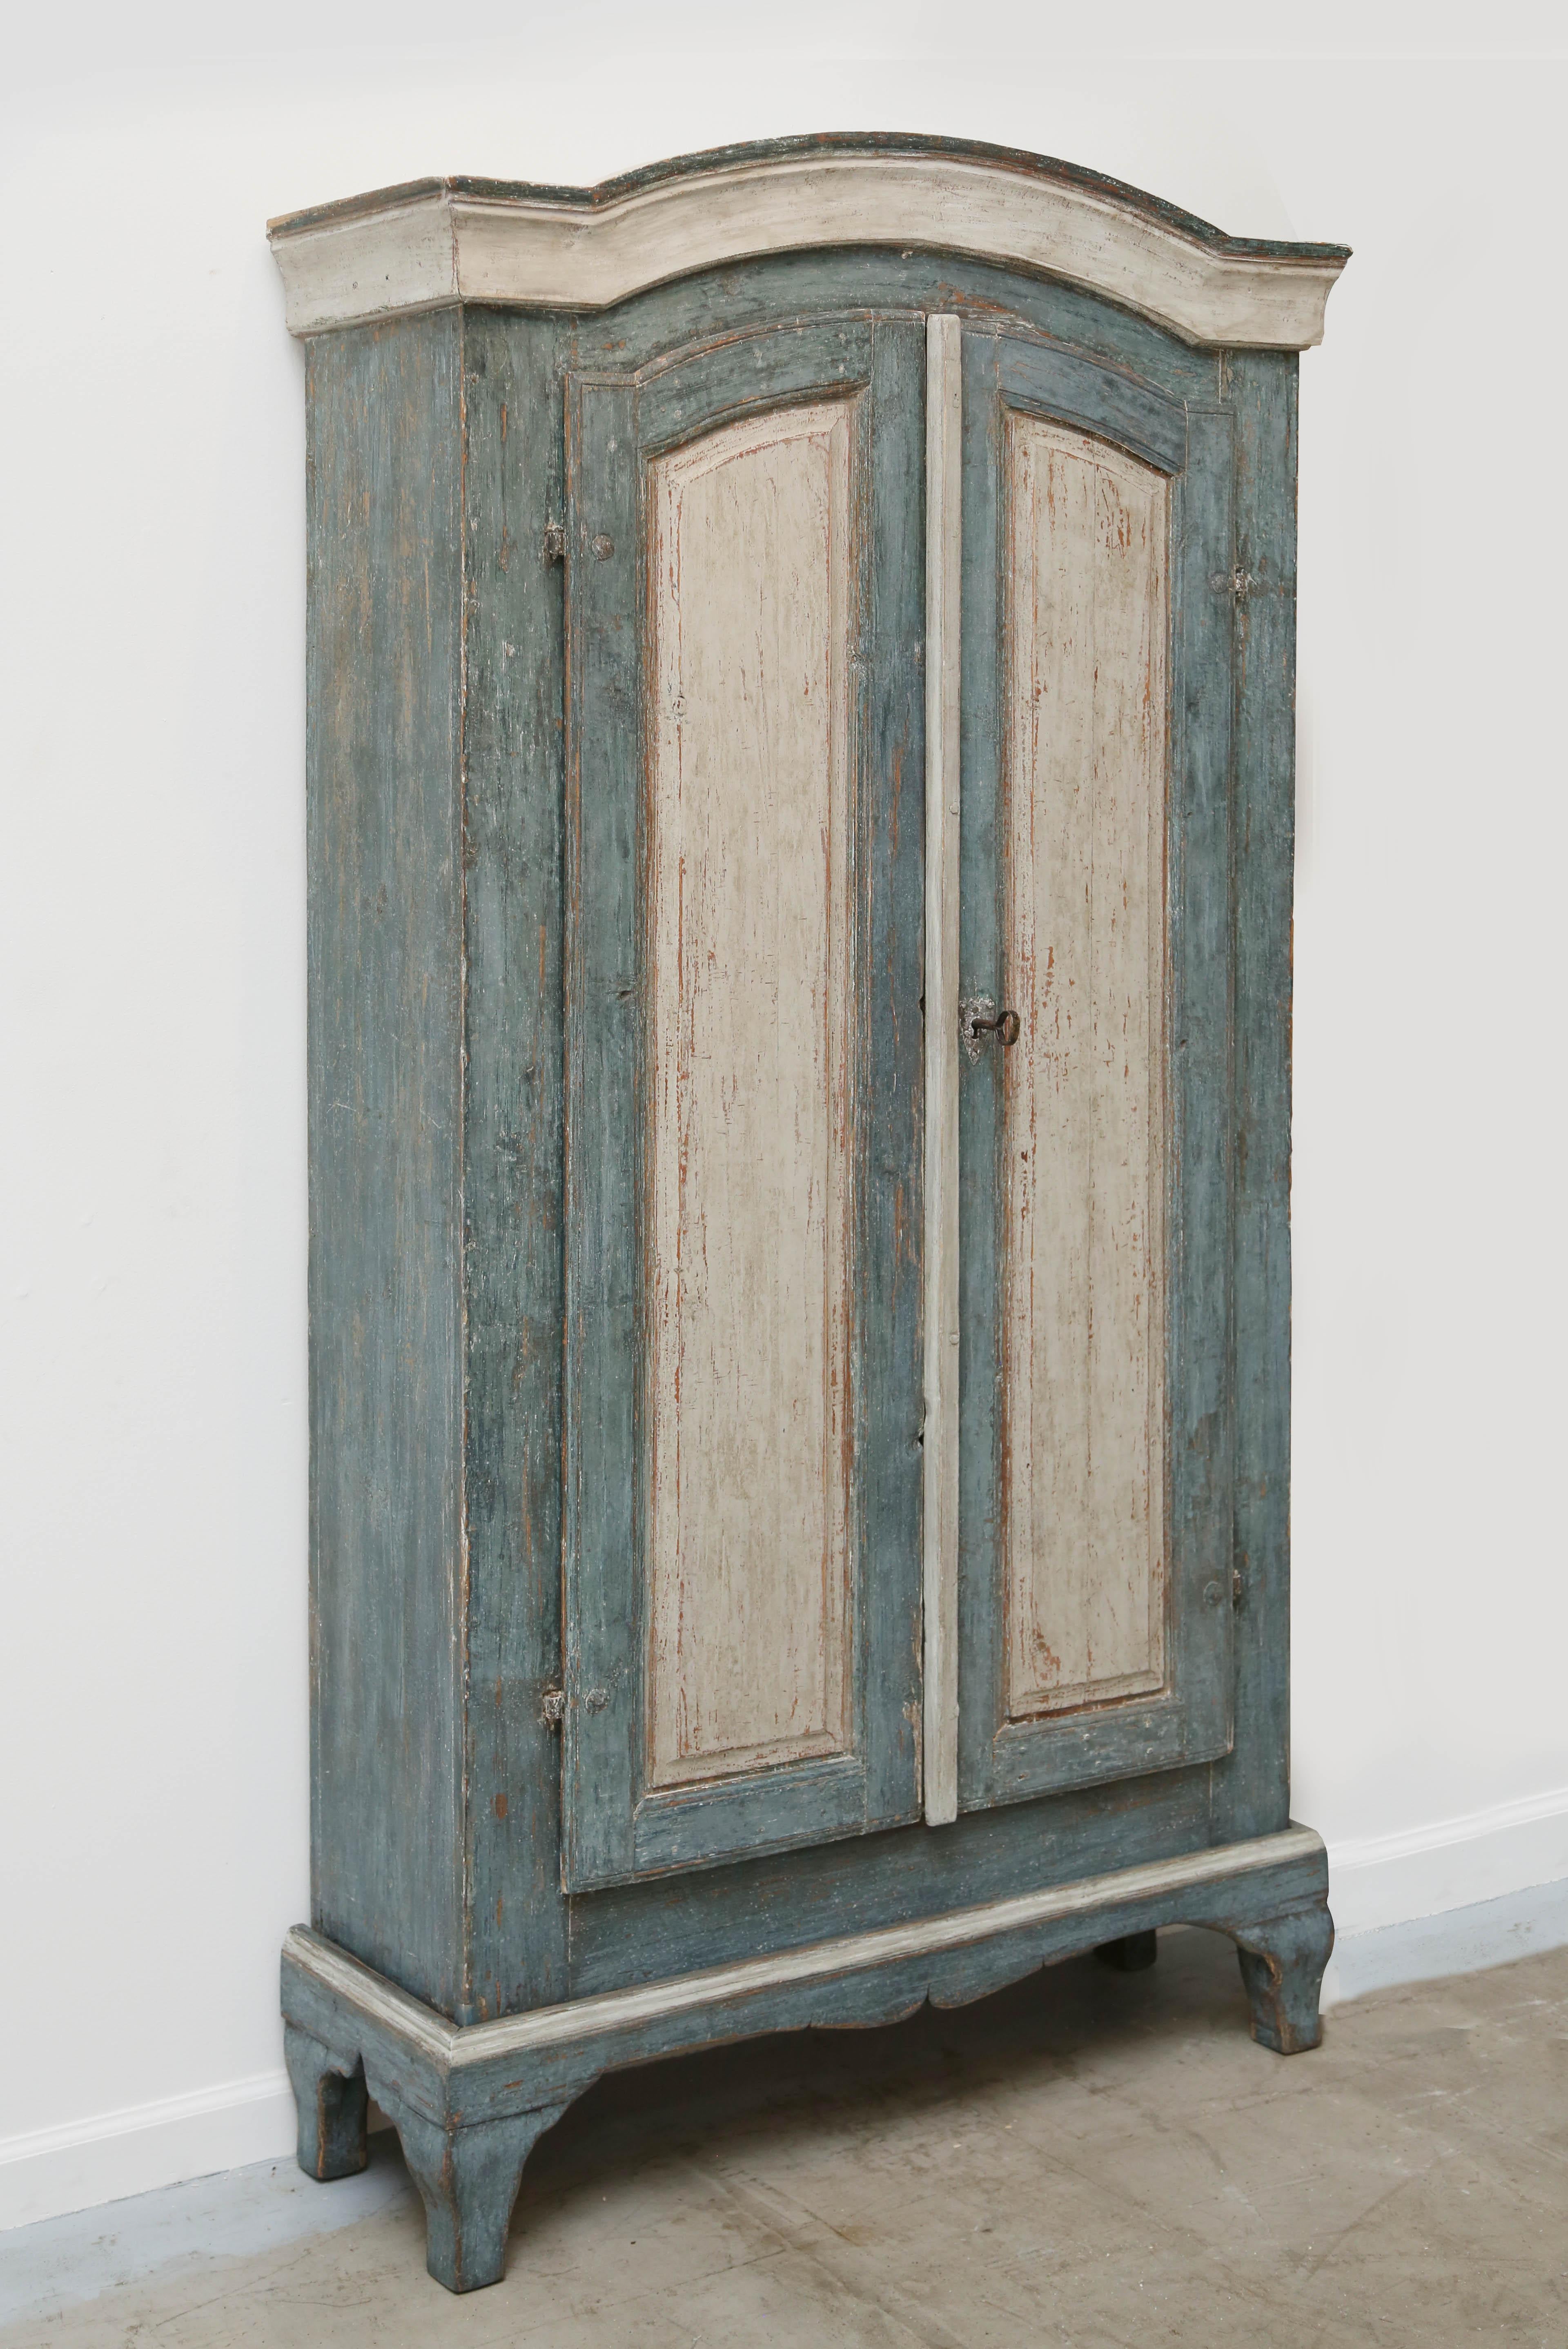 Antique Swedish Baroque distressed original painted blue and white- greyish armoire /cabinet. Lovely carved arched wood top cornice. Two full length raised panel carved doors with original lock and key. Cabinet sits on a raised base with curved legs